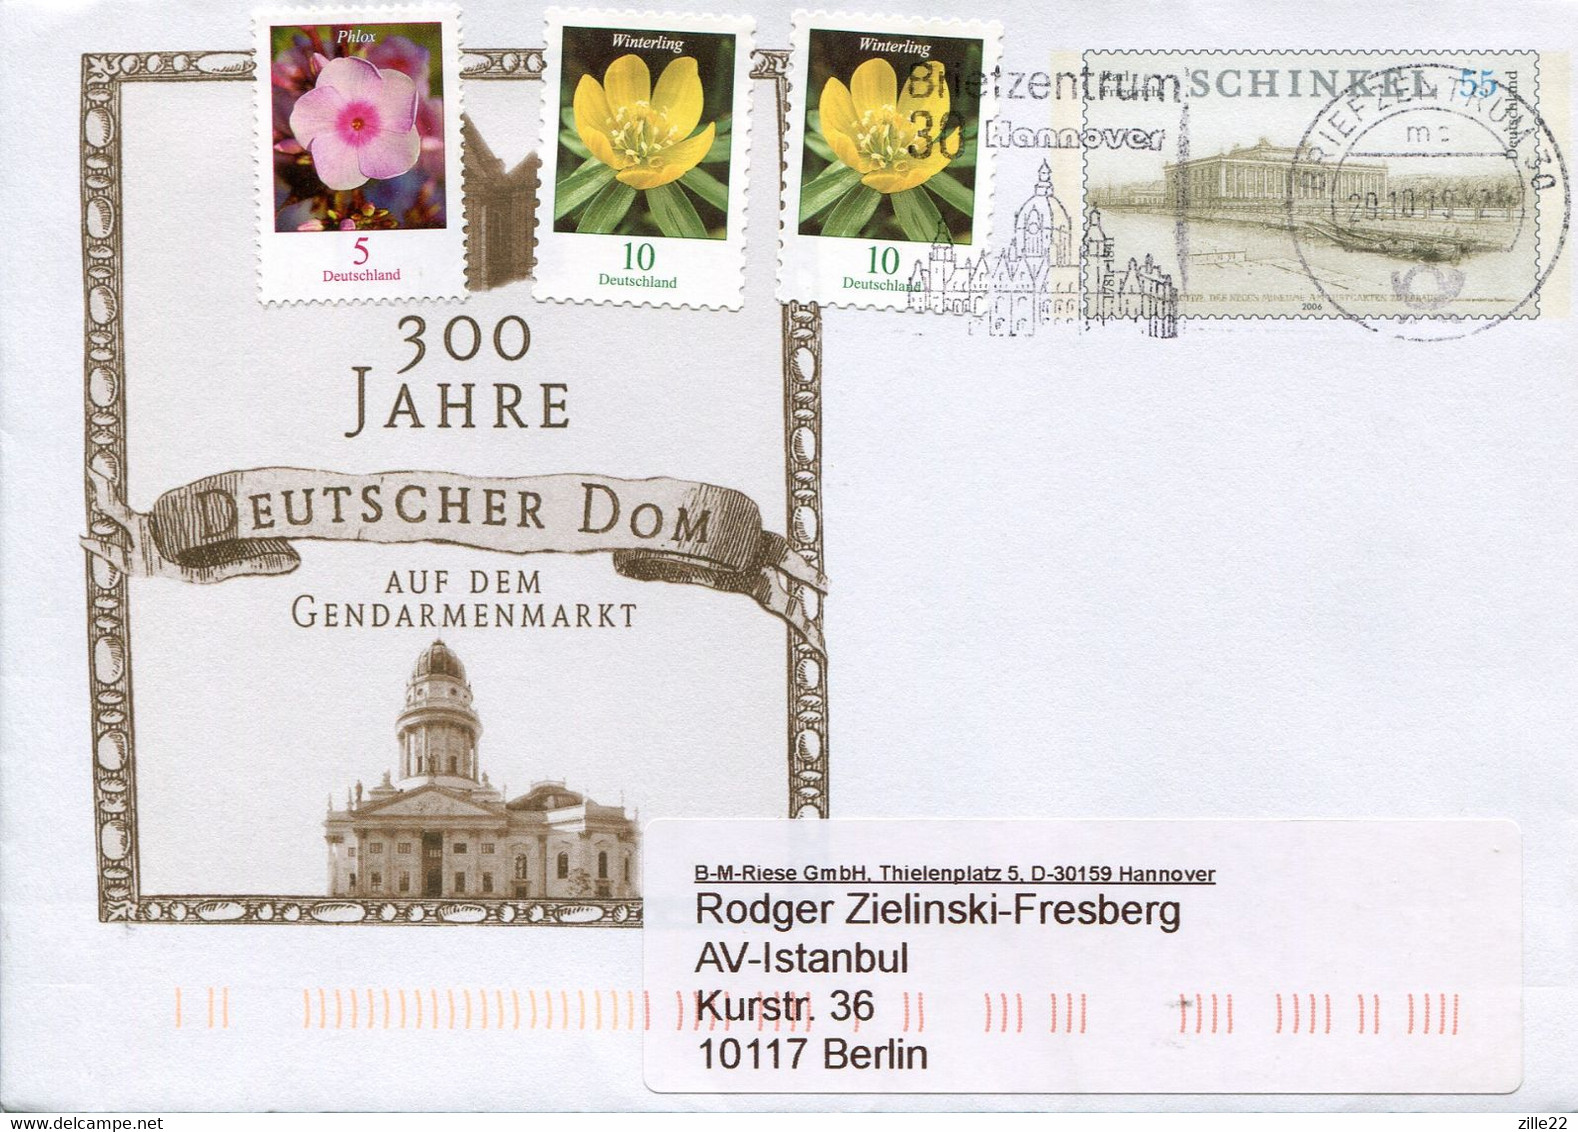 Germany Deutschland Postal Stationery - Cover - Schinkel Design -  Berlin Cathedral - Private Covers - Used